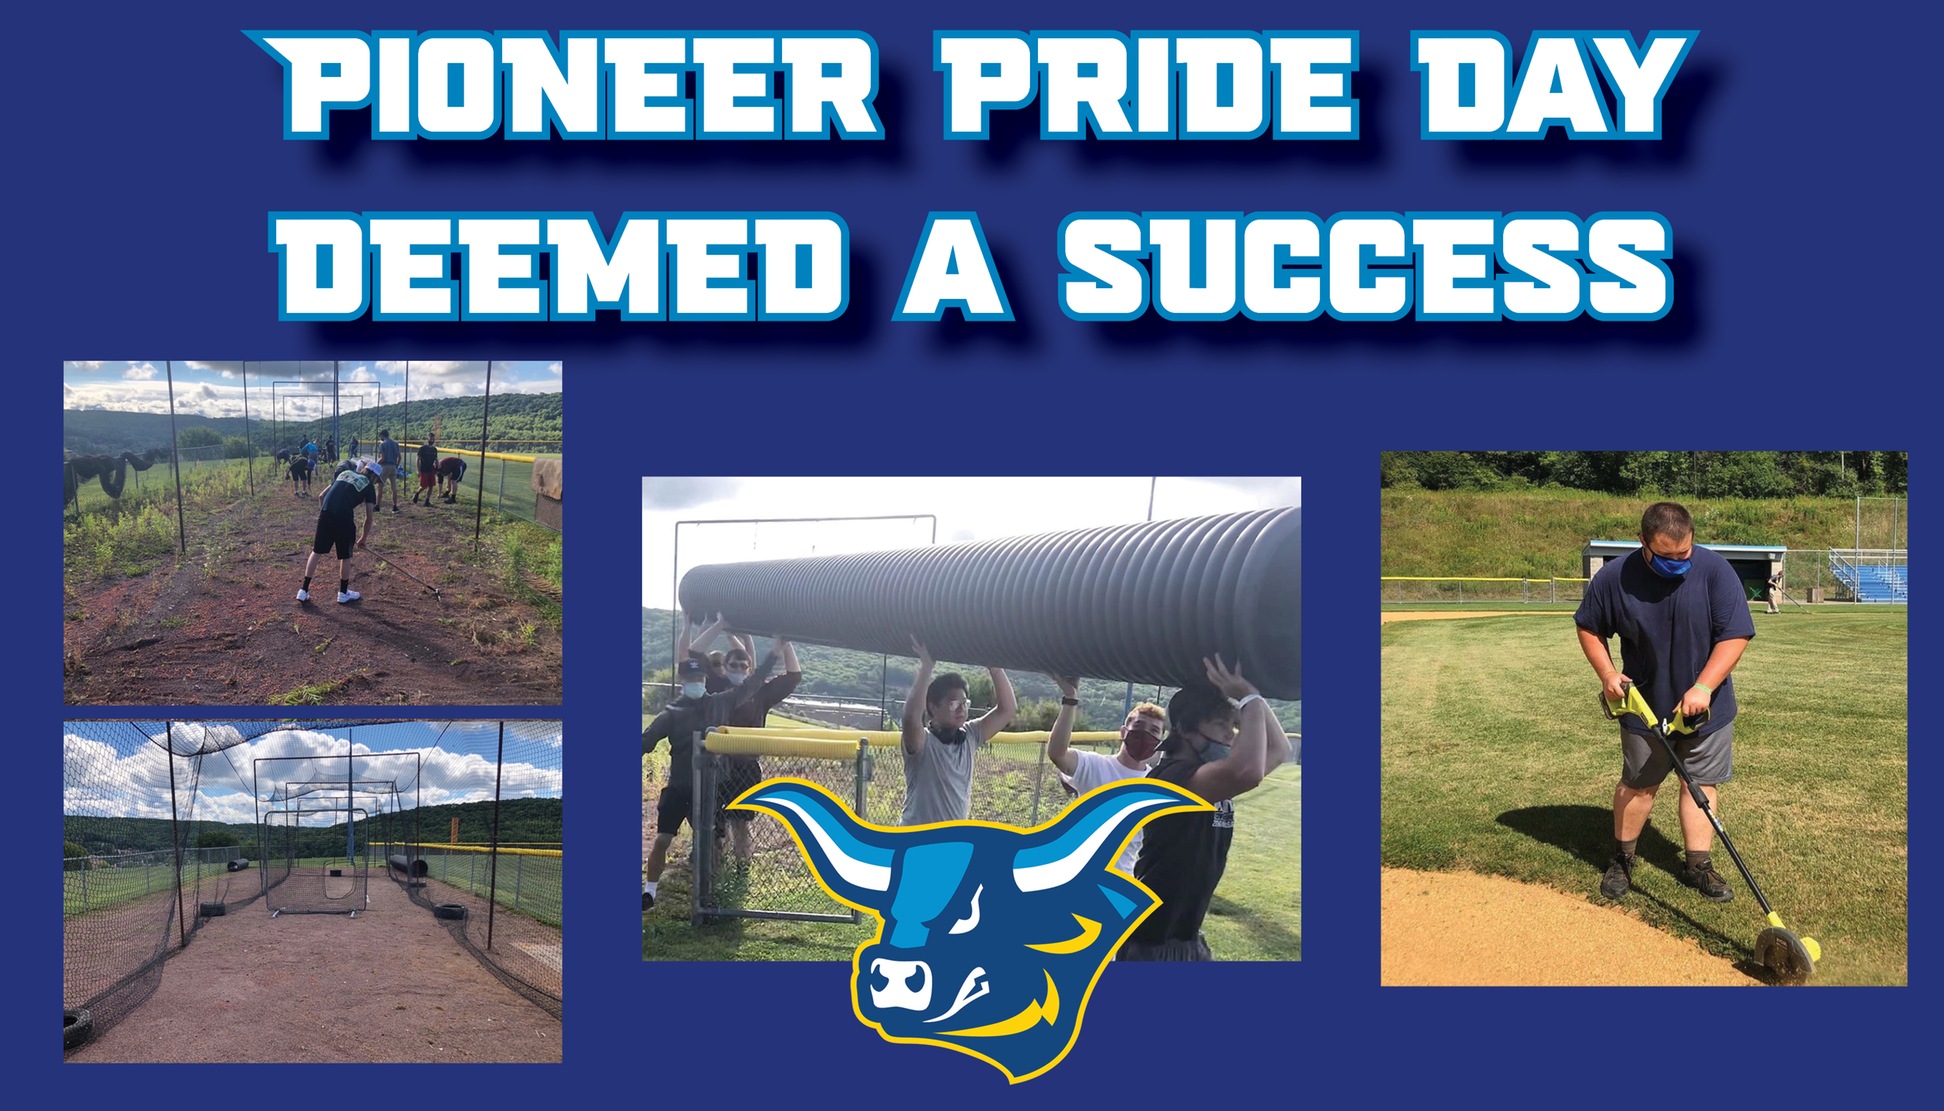 Images of work done during the Annual Pioneer Pride Day